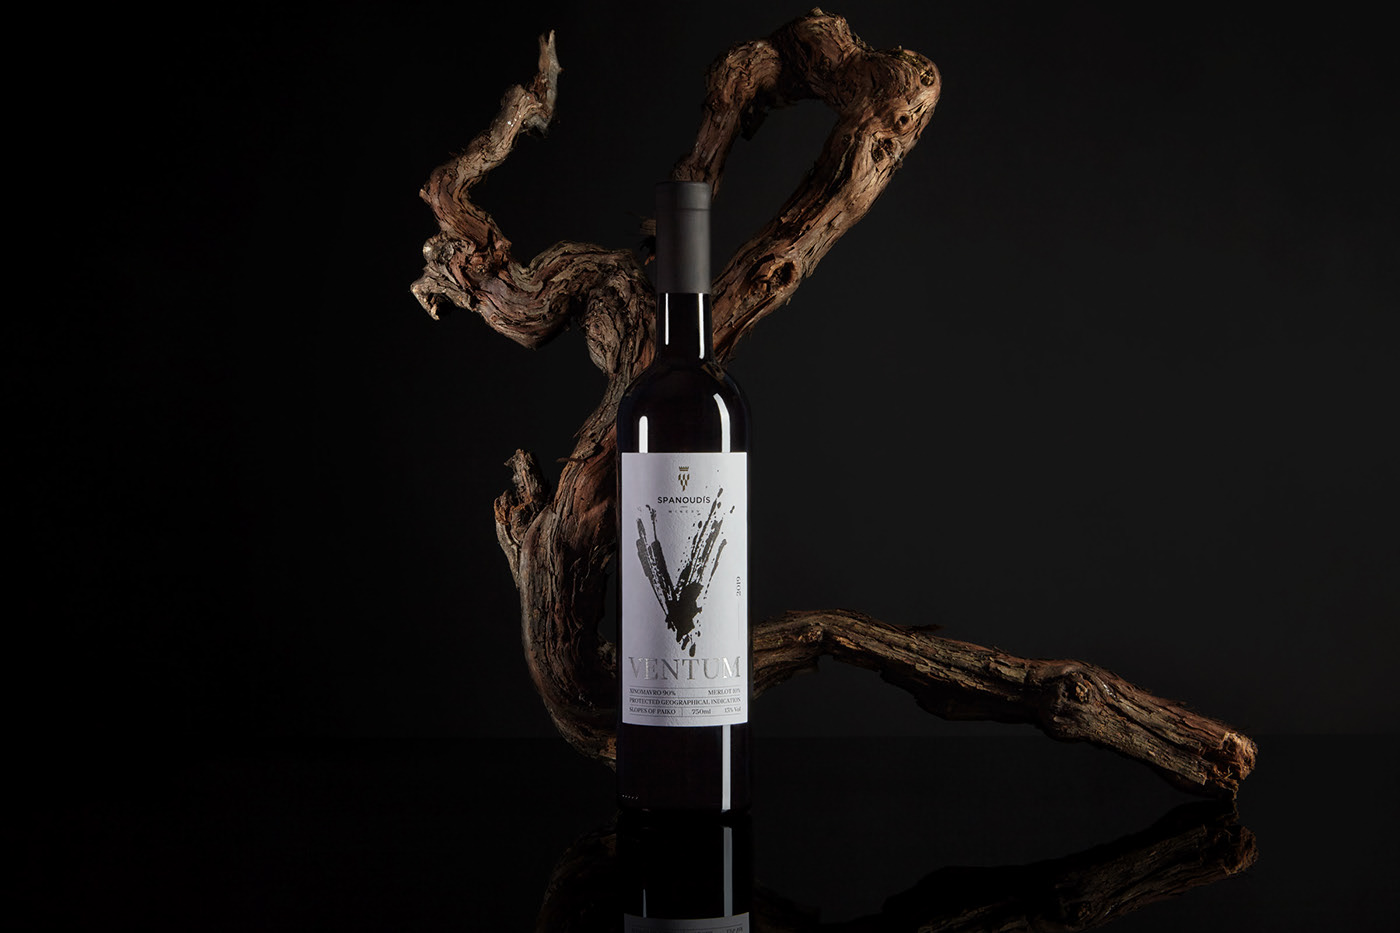 Spanoudis Winery branding and packaging design by Cursor Design